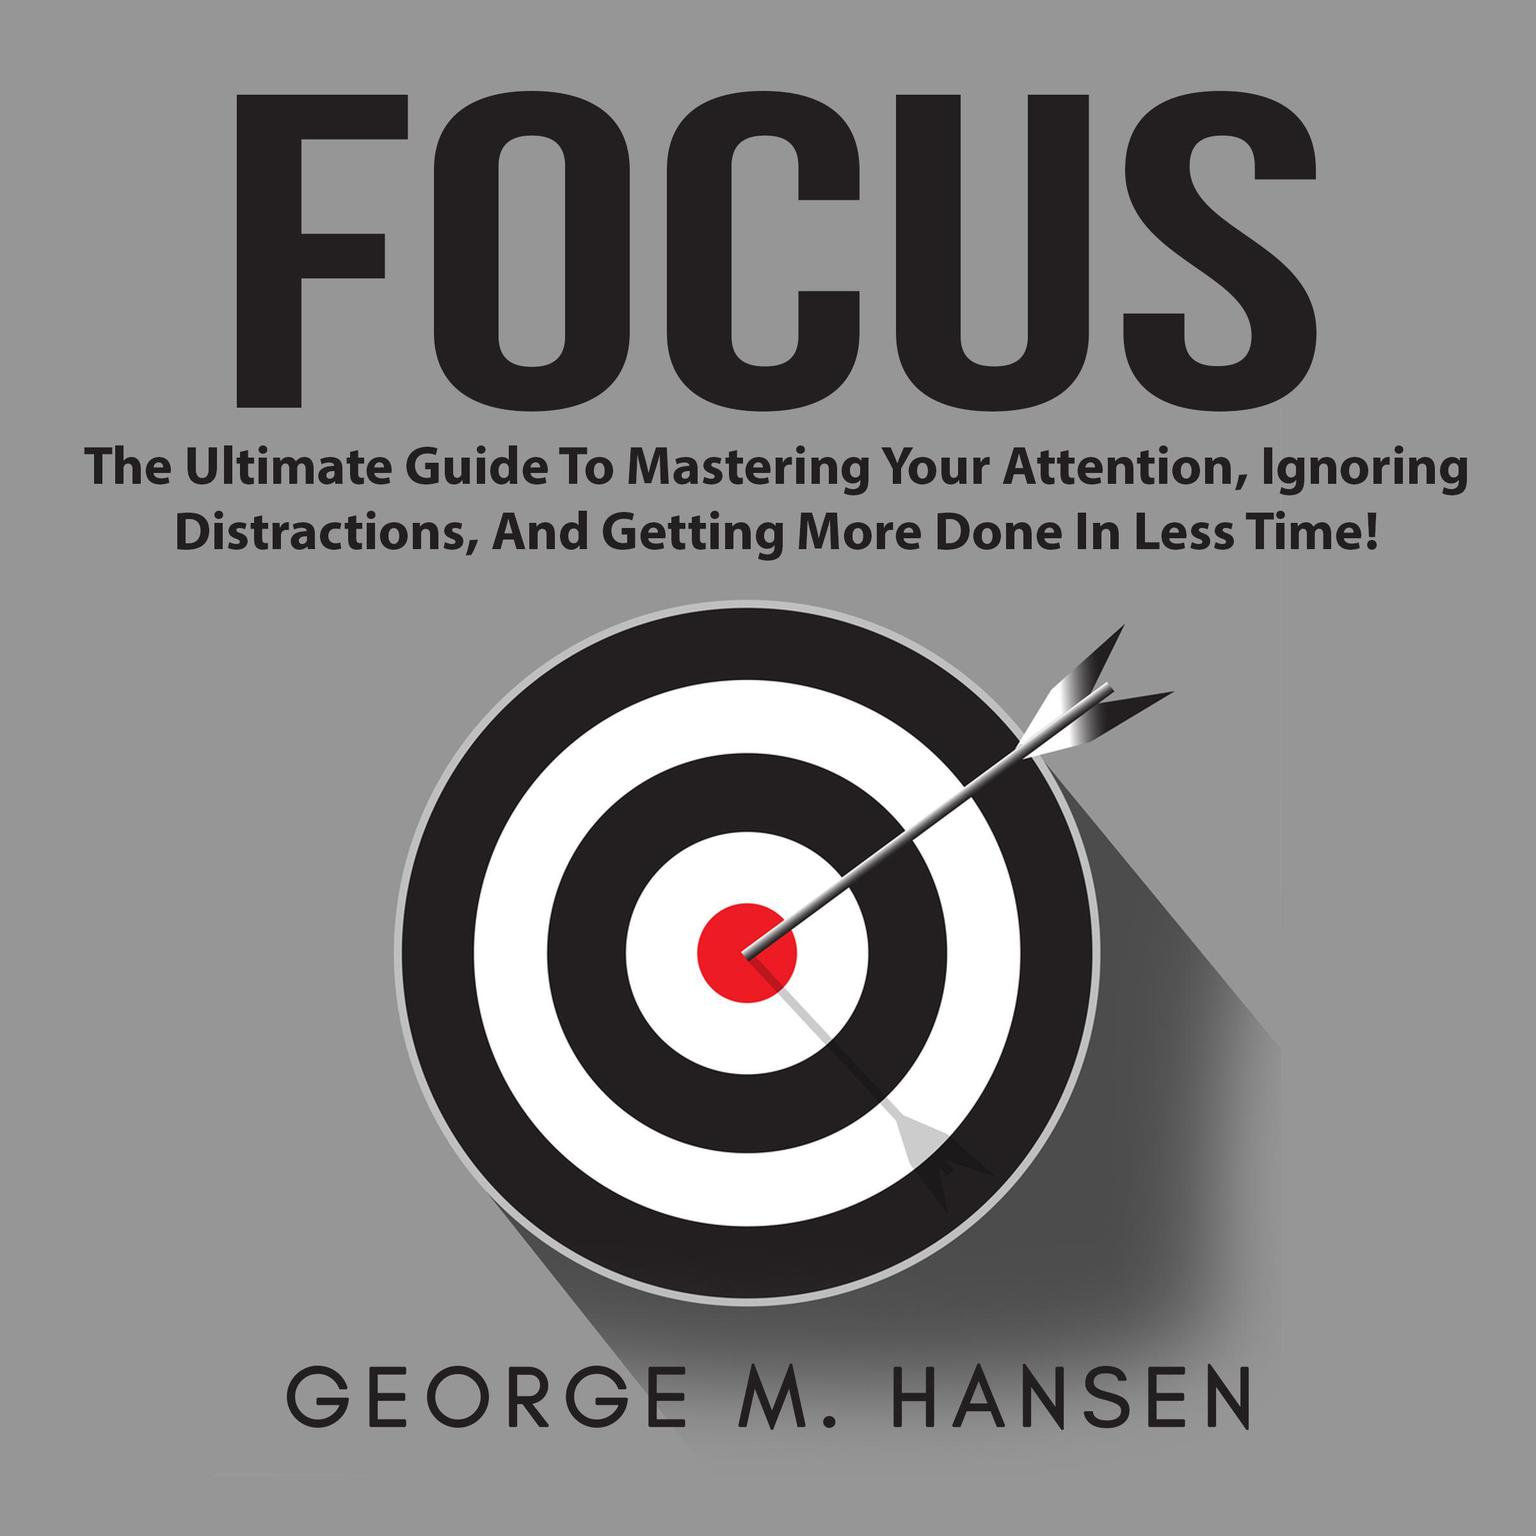 Focus: The Ultimate Guide To Mastering Your Attention, Ignoring Distractions, And Getting More Done In Less Time! Audiobook, by George M. Hansen